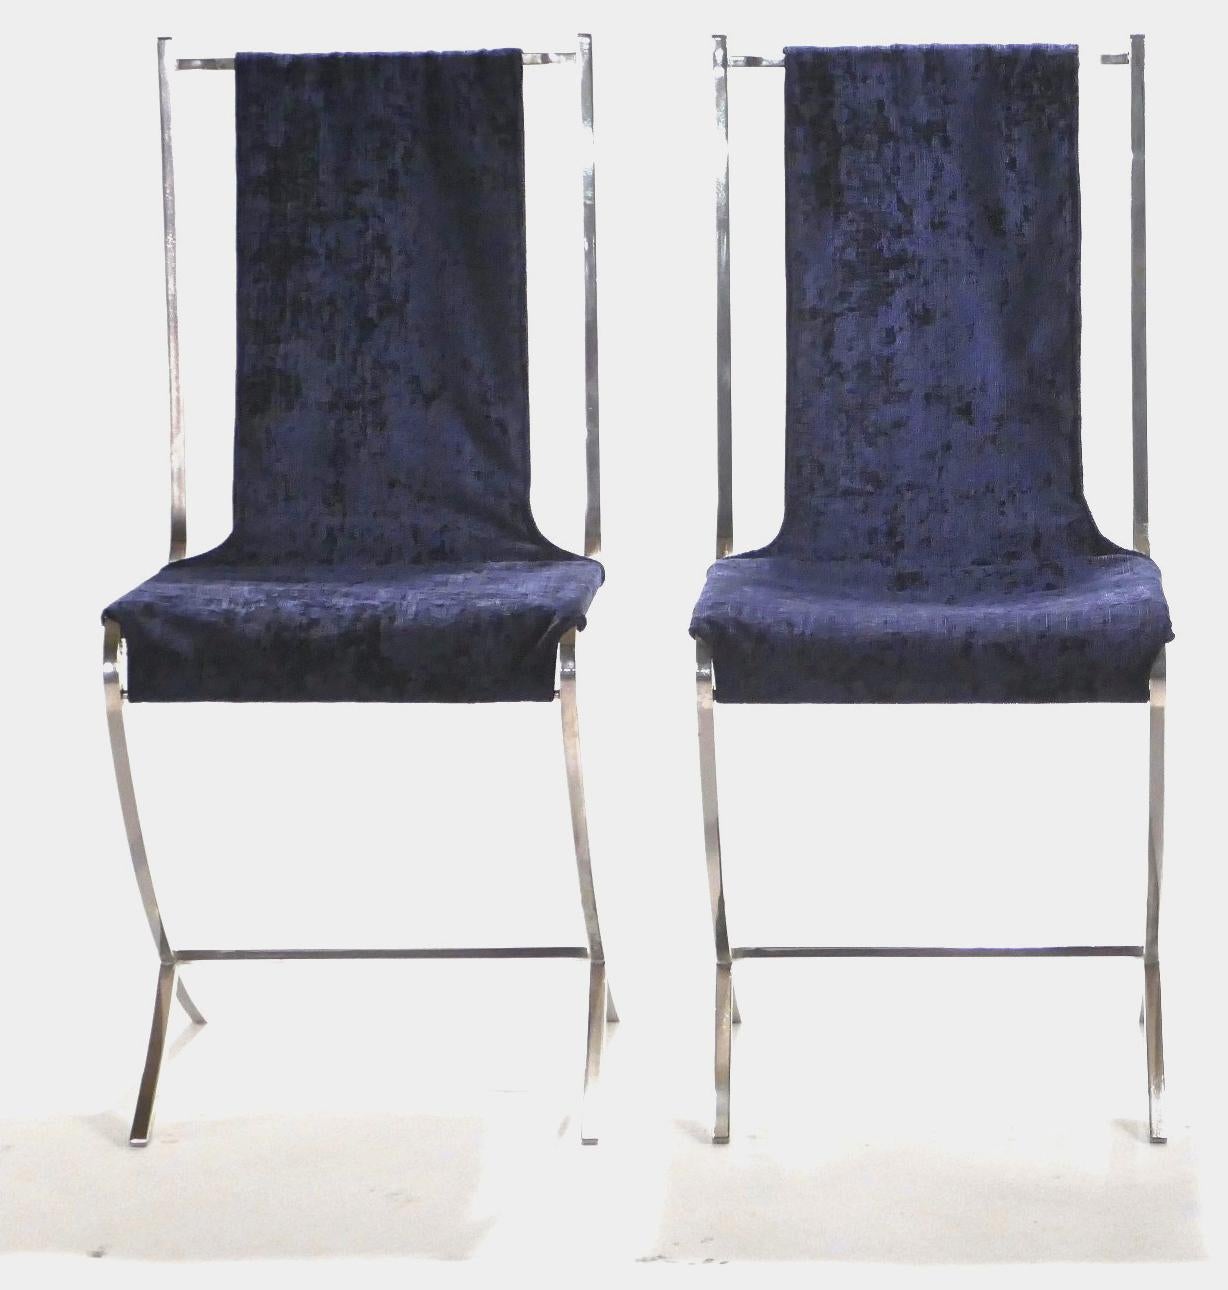 Lounge on extravagant deep blue velvet, suspended across a sturdy, but artfully imagined structure made of heavy nickeled metal. This pair of chairs was created by French avant-garde designer Pierre Cardin for well-known interior design firm Maison